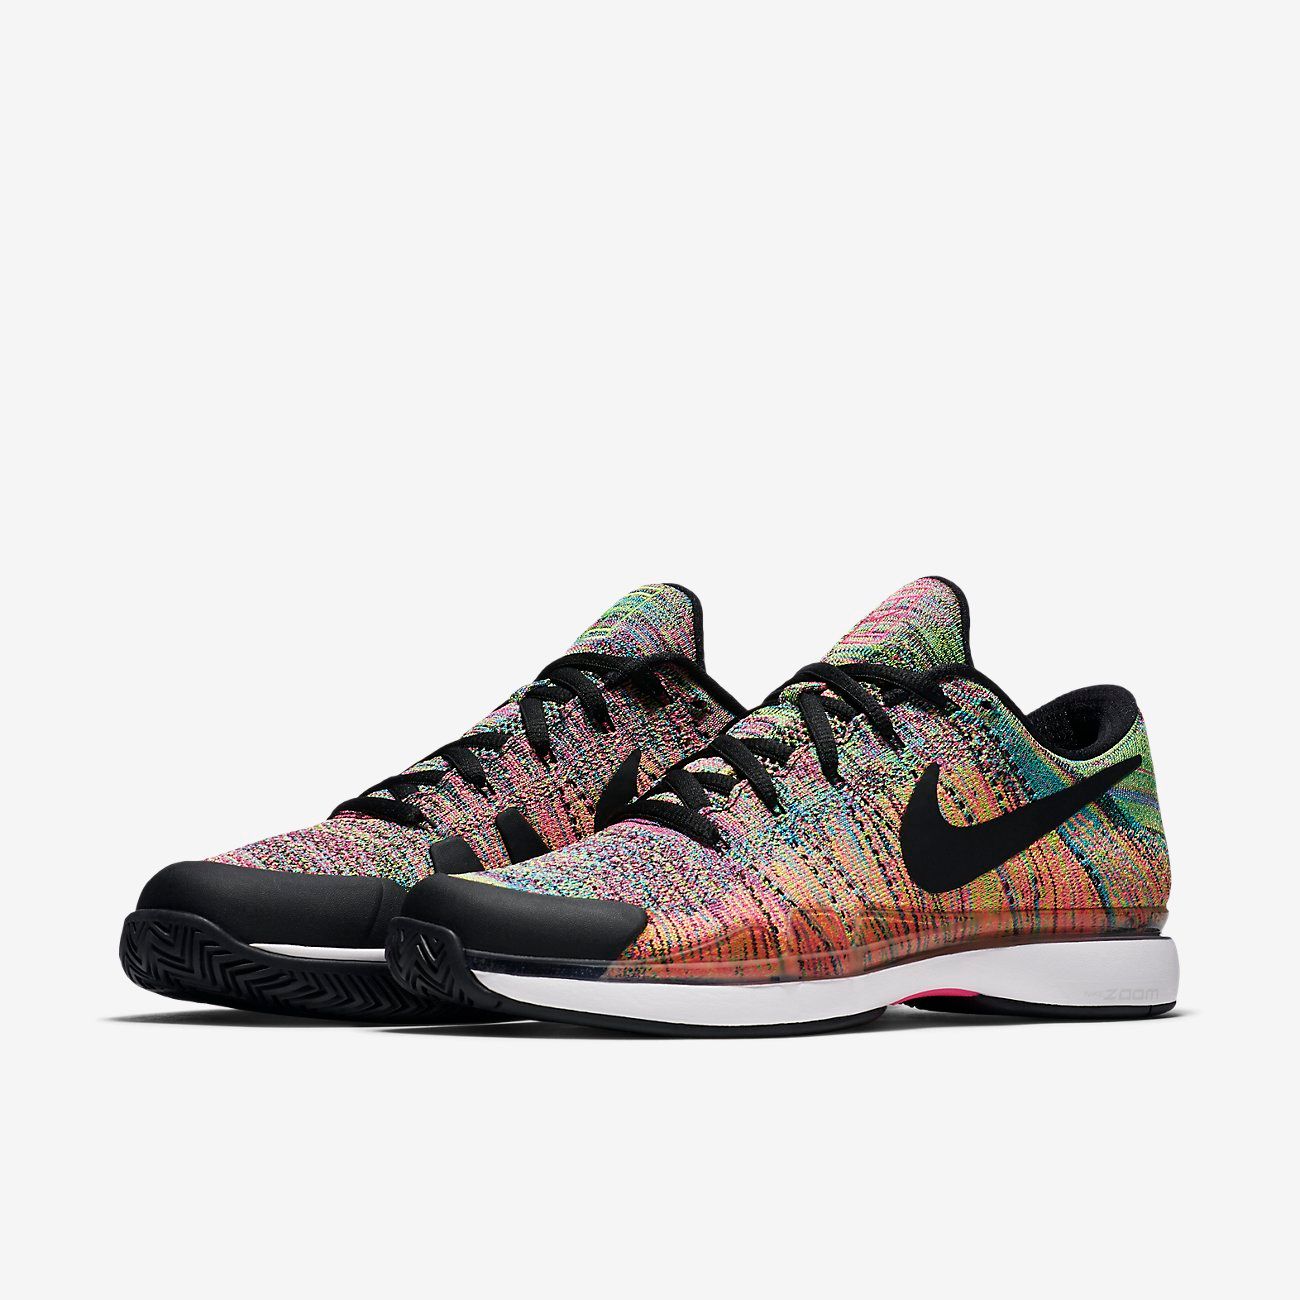 applaus honing native KicksFinder on Twitter: "The Nike Zoom Vapor 9.5 Flyknit 'South Beach  Sunset' now available on Nikestore: https://t.co/Sdt0RzPspT  https://t.co/Sdt0RzPspT https://t.co/1l7J4qLyEl" / Twitter